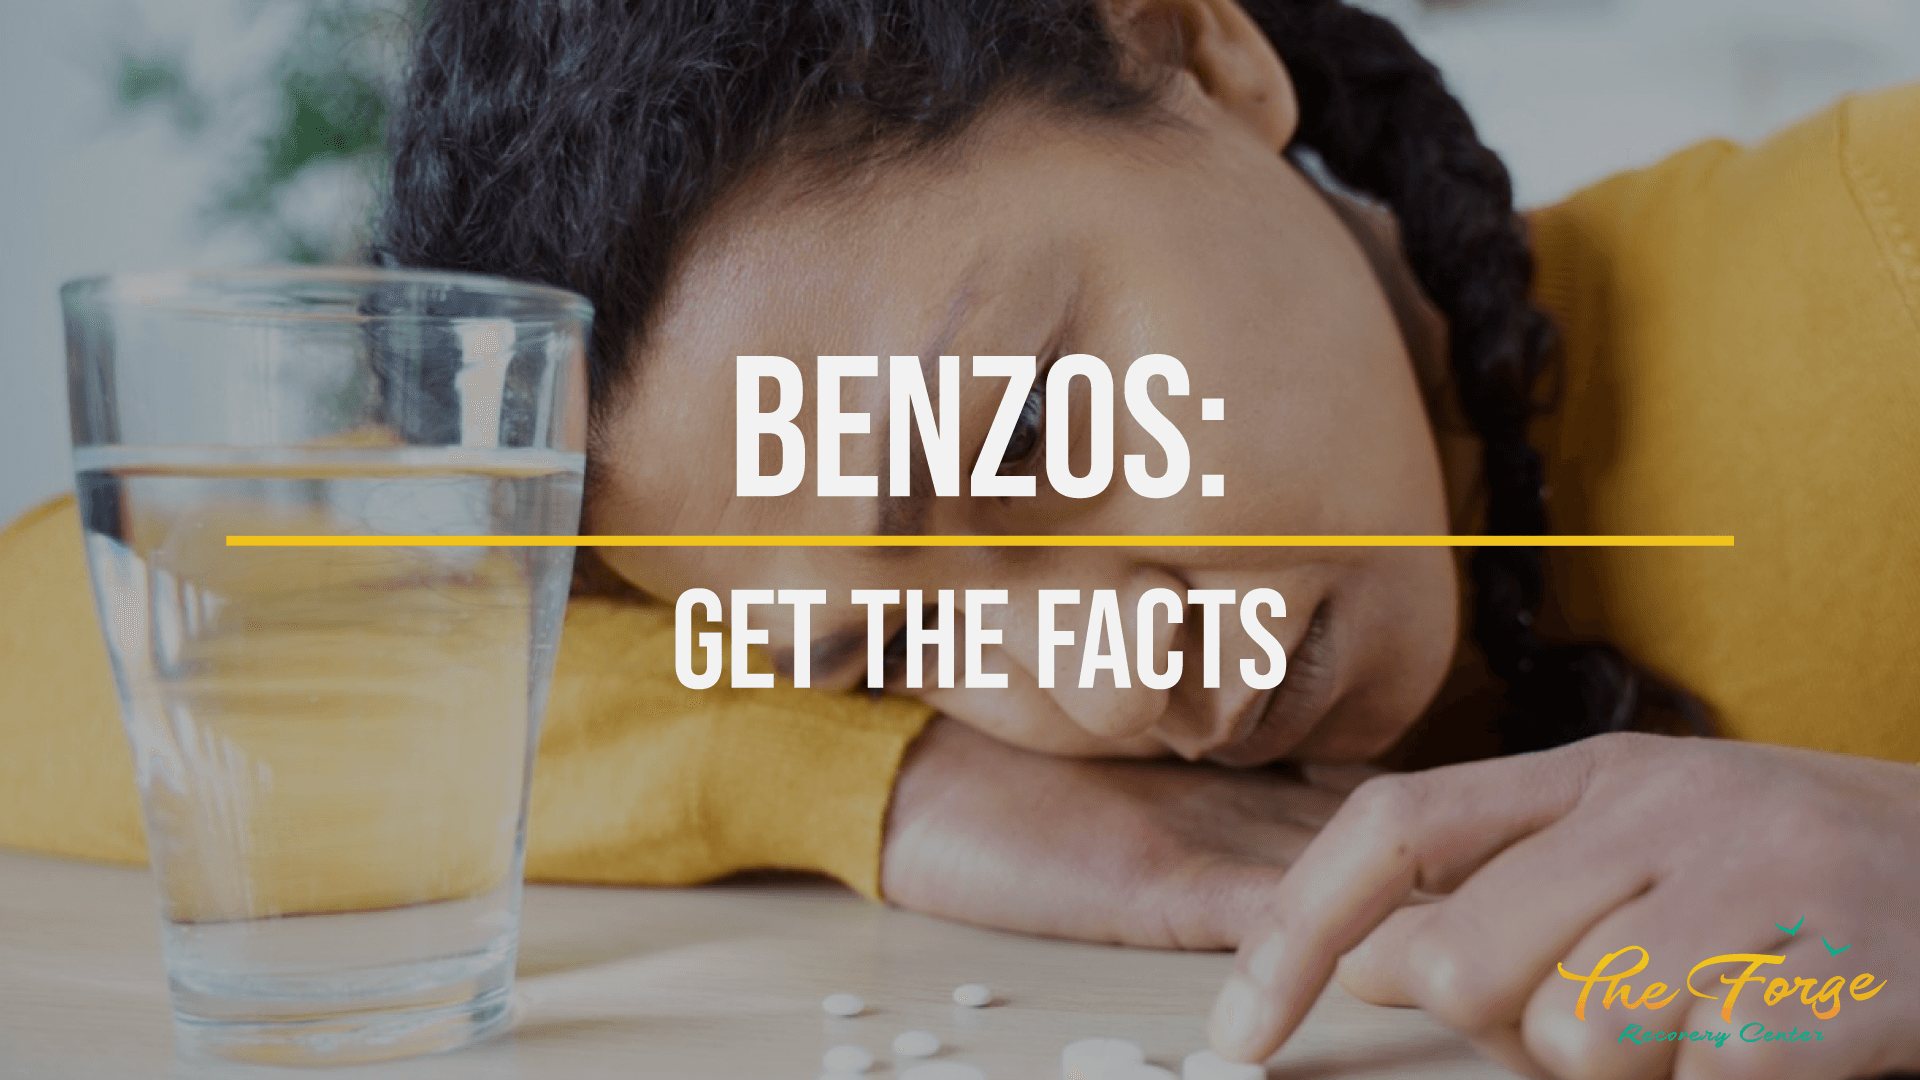 What are Benzos?